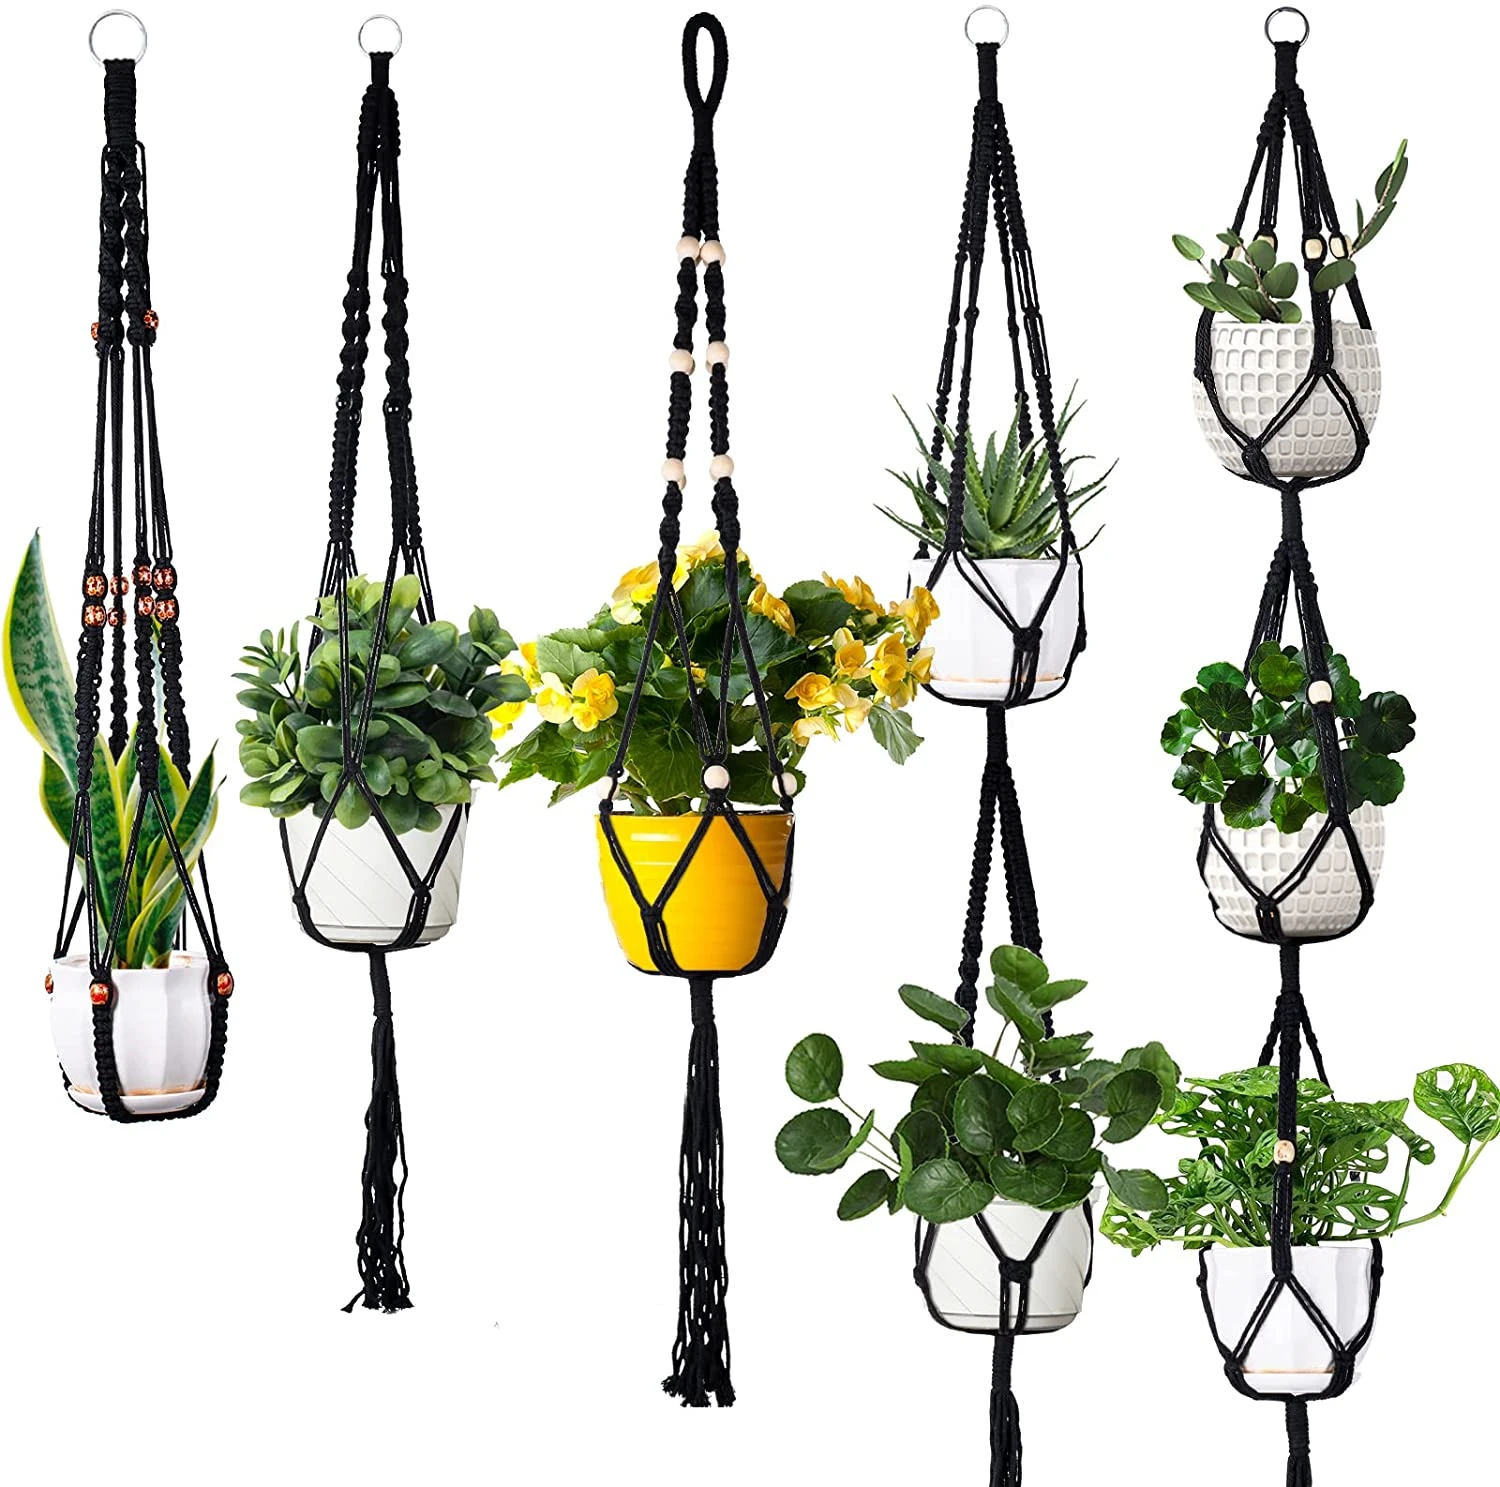 Macrame handmade plant hanger baskets flower pots holder balcony hanging decoration knotted lifting rope home garden supplies cement flower pots